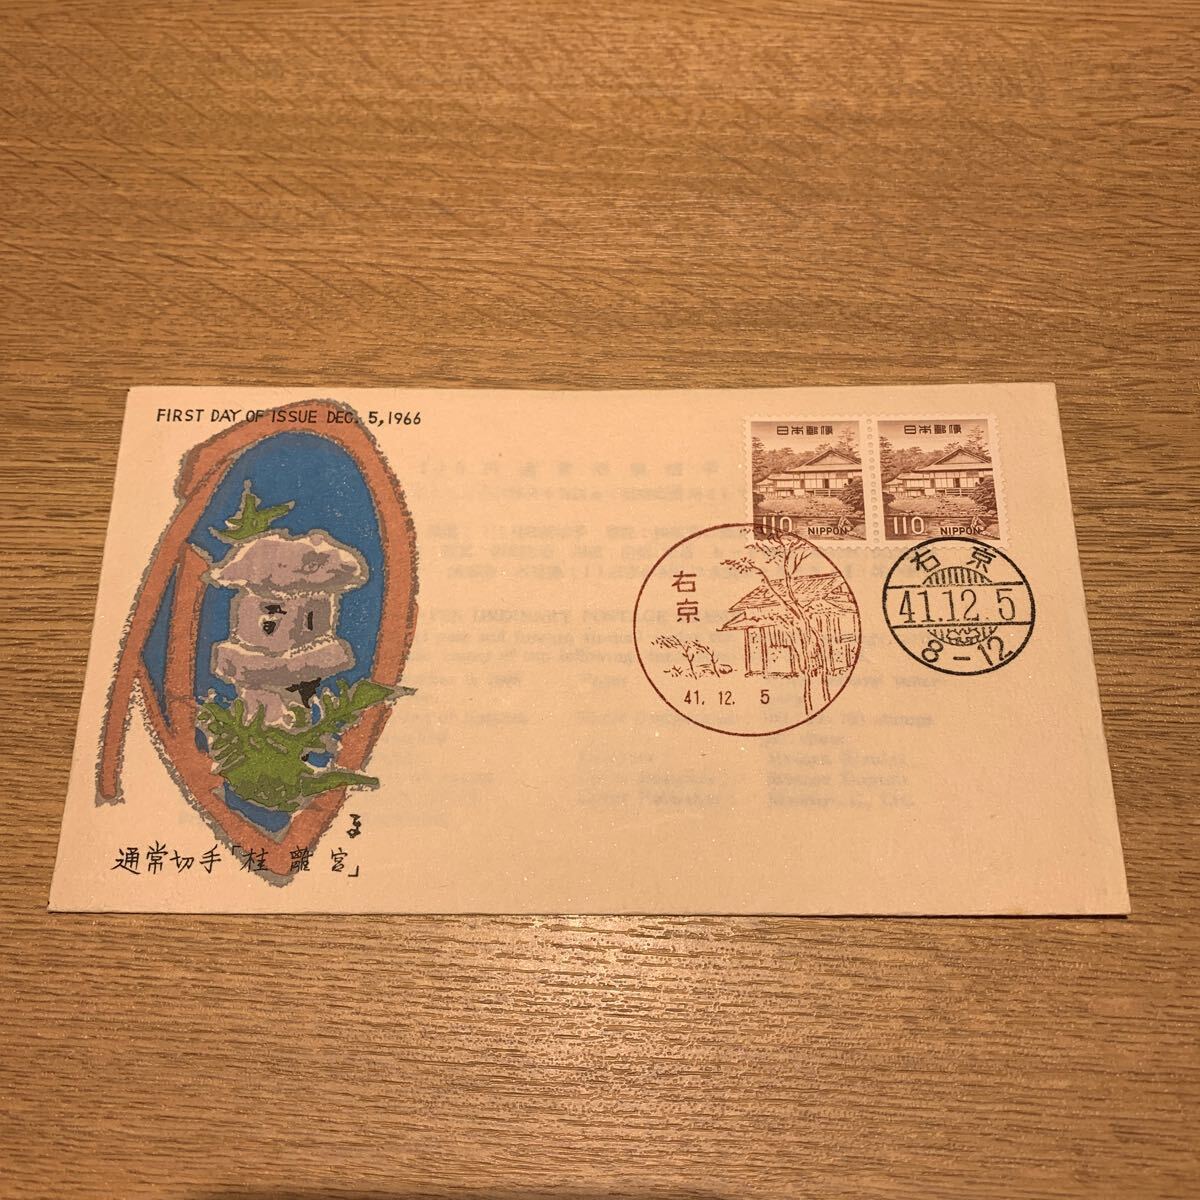  First Day Cover 110 jpy general mail stamp : 110 jpy mail stamp katsura tree .. Showa era 41 year issue 